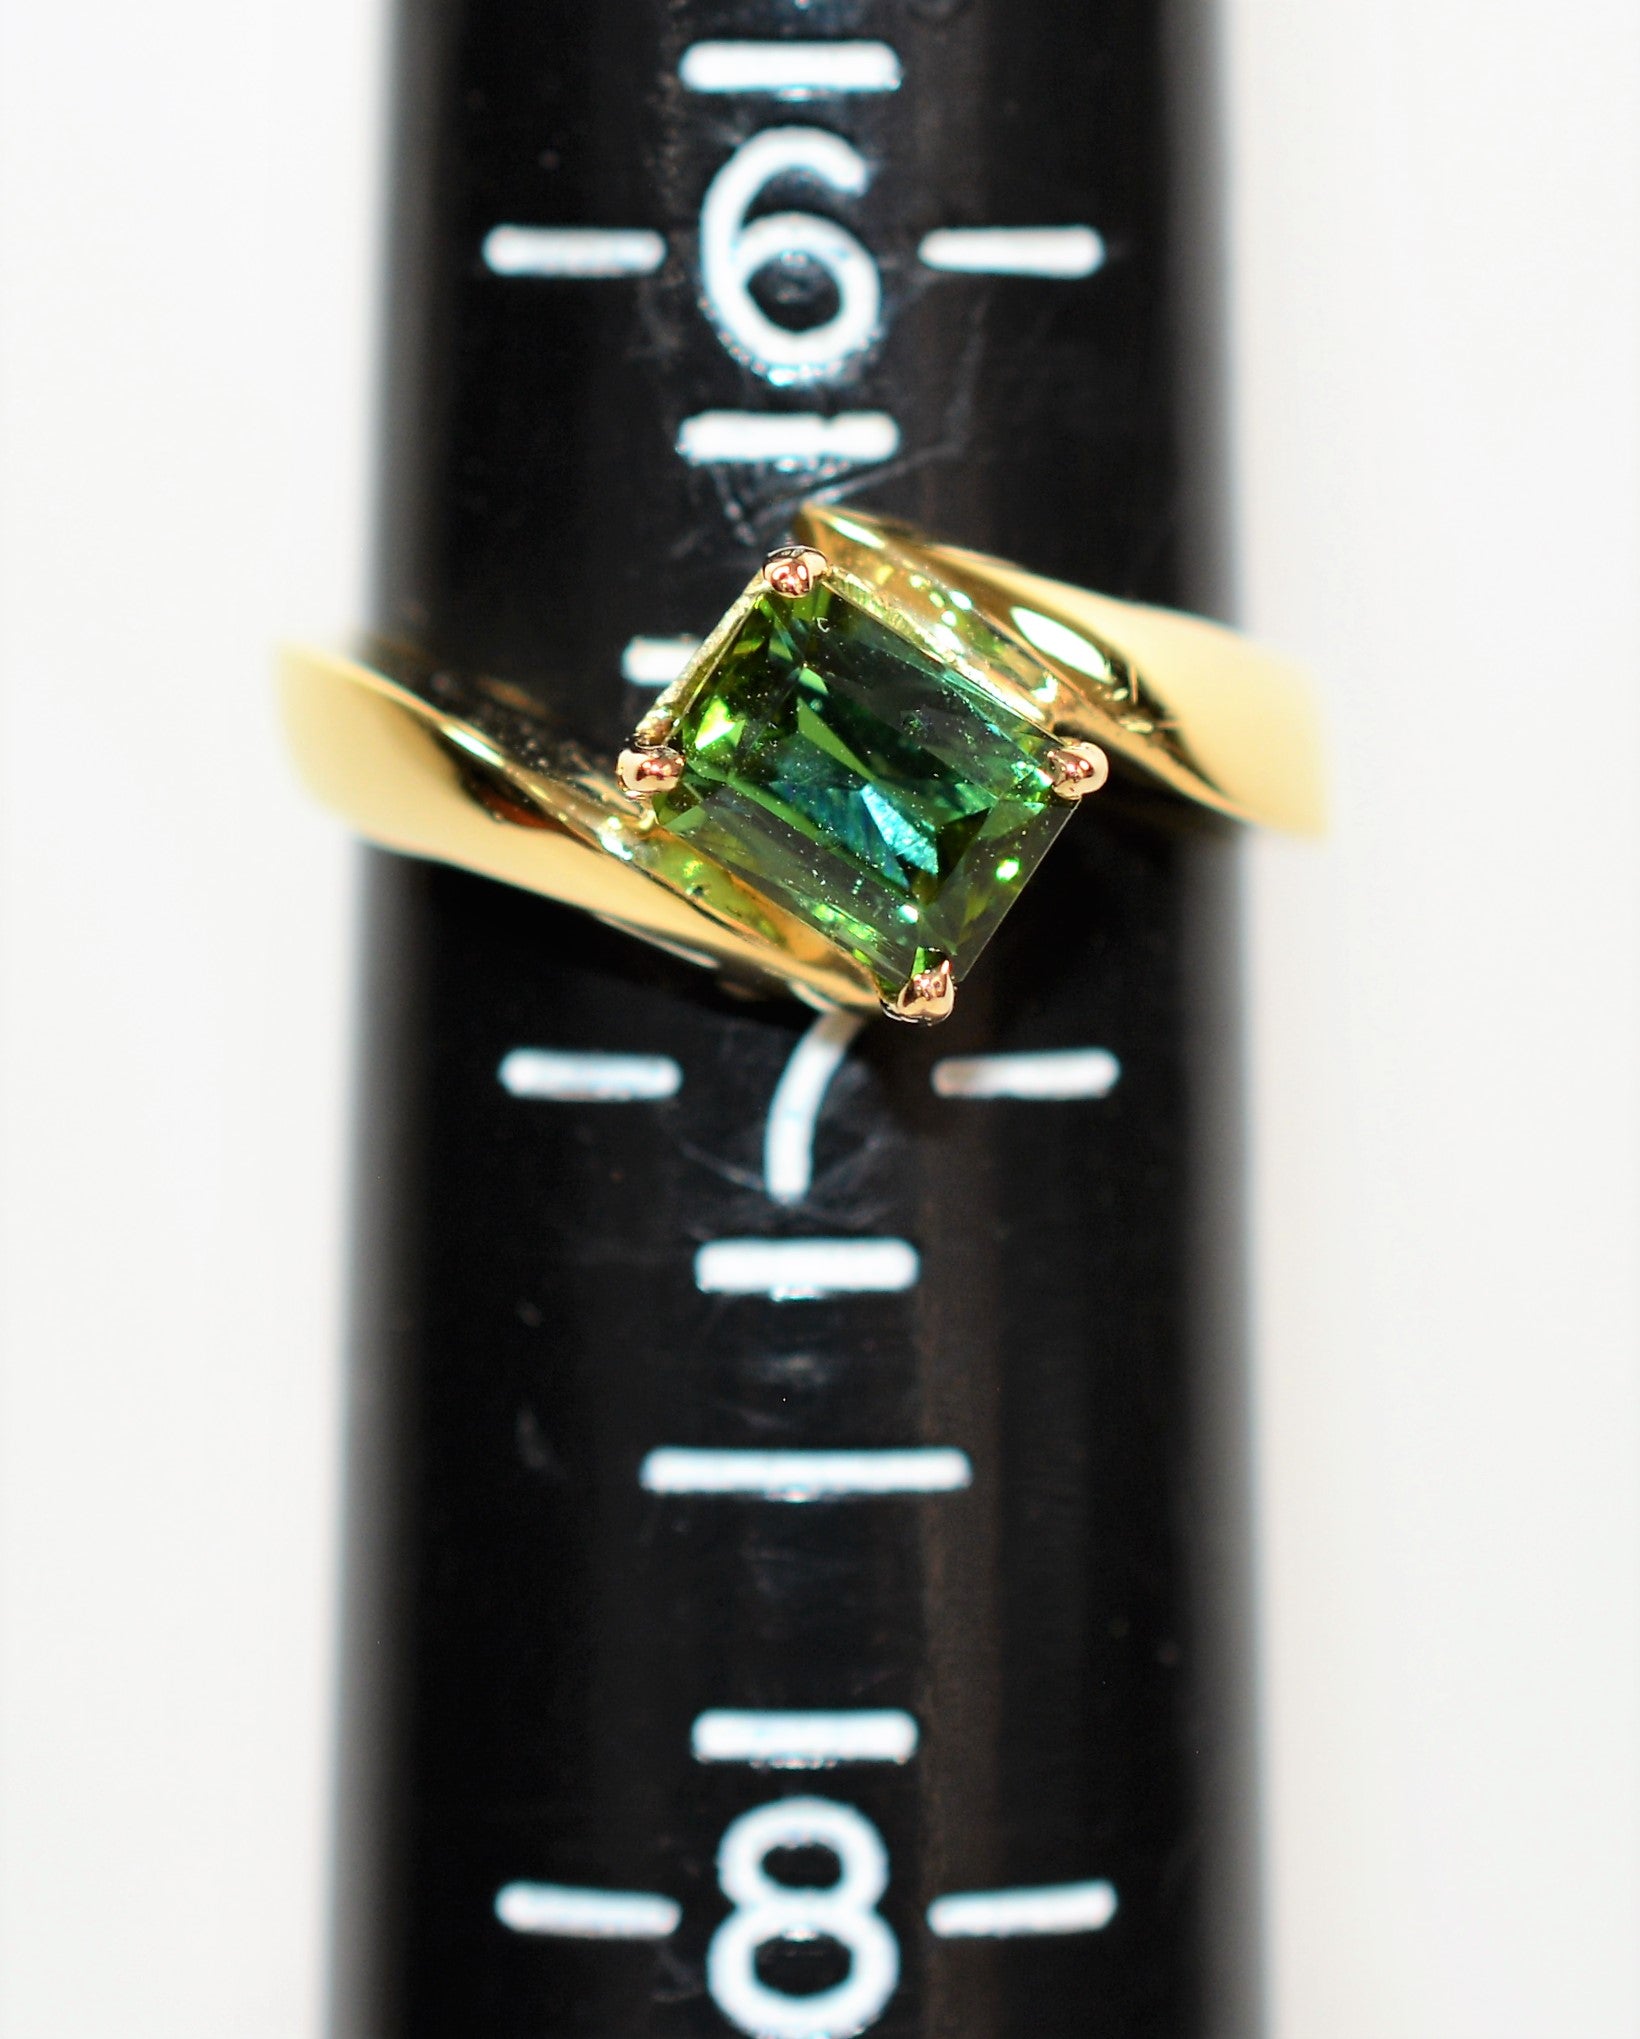 Certified Natural Paraiba Tourmaline Ring 18K Solid Gold 1.25ct Solitaire Gemstone Women's Estate Jewelry